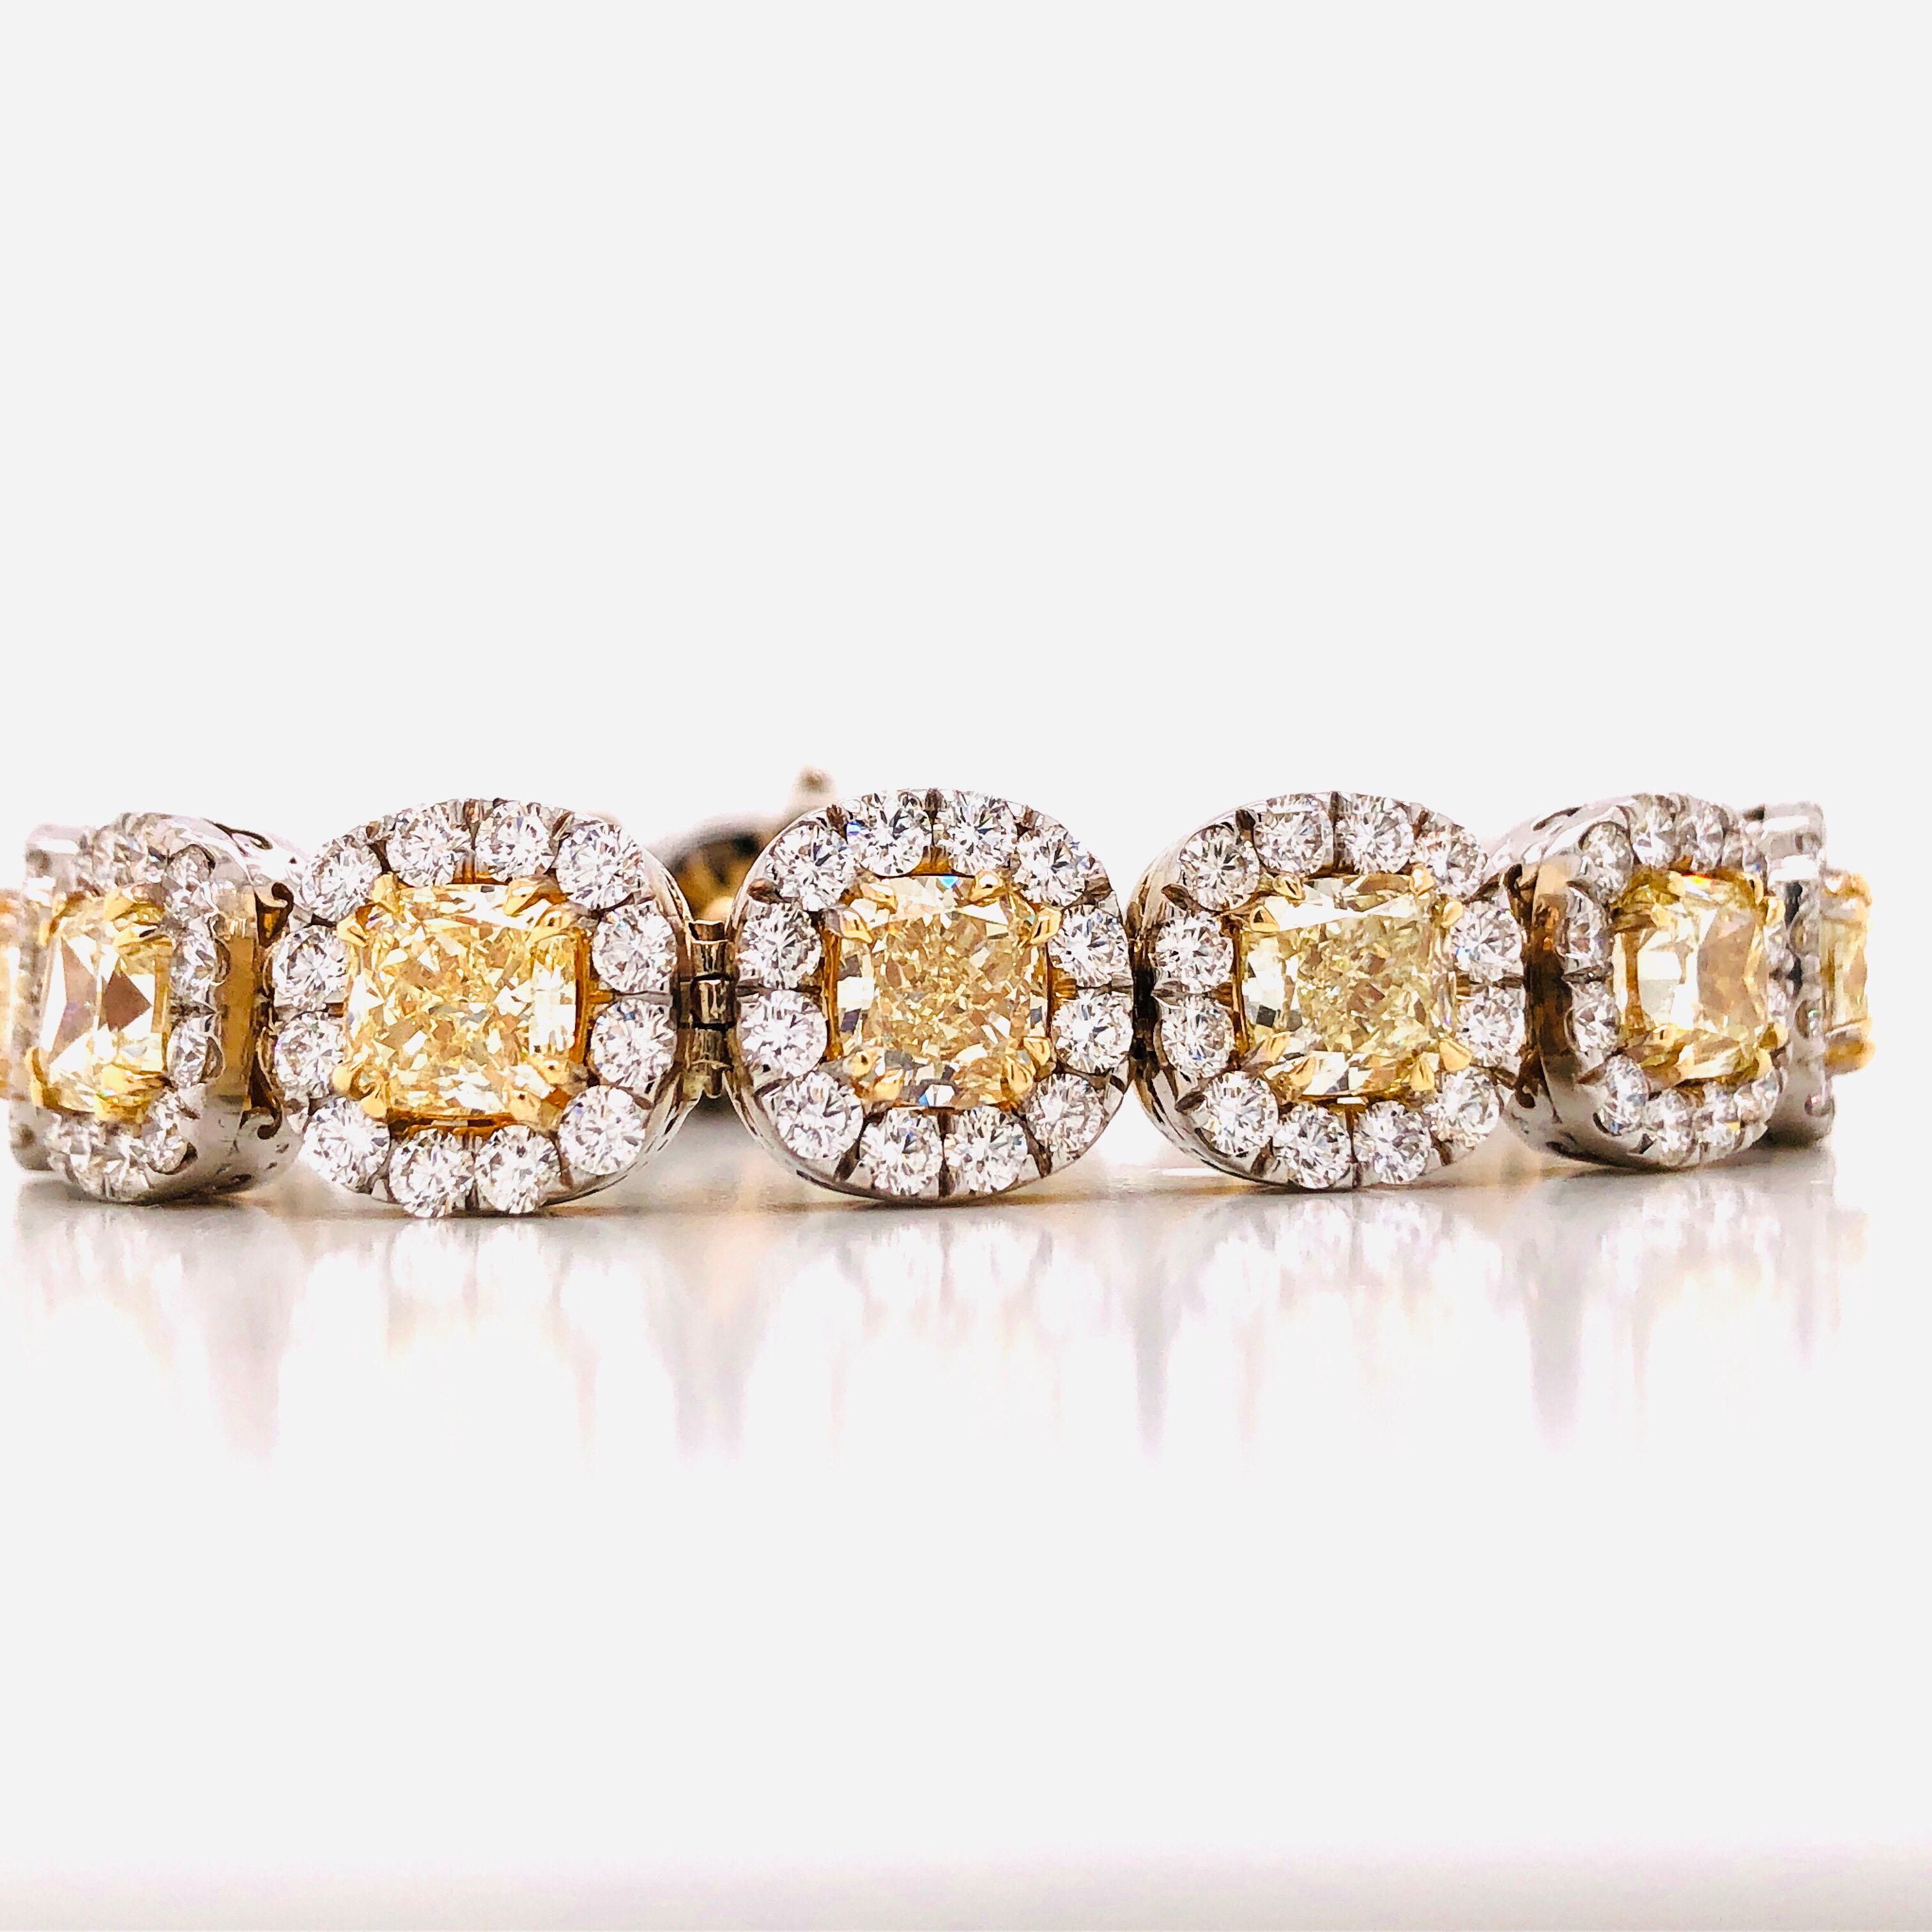 Featuring just 15 yellow diamonds totaling a whopping 22.93 carats, the average weight of each yellow diamond is approx 1.52 carats! The bracelet width is about 11.70mm wide with the yellow diamonds averaging about 6.30mm. The diamond clarity